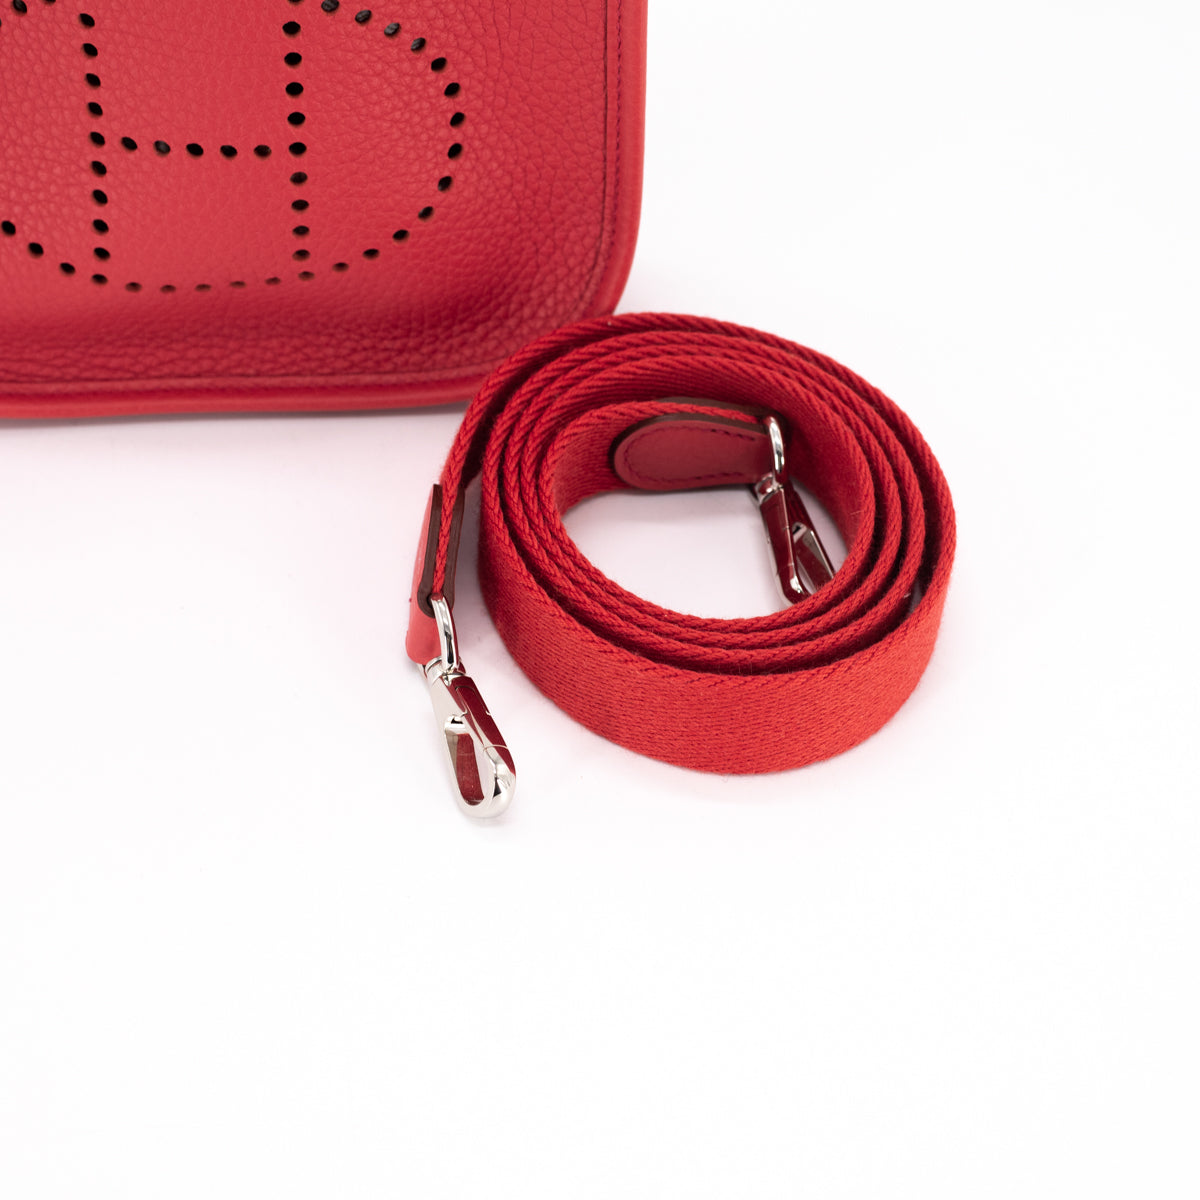 BNIB HERMES Evelyn 16 TPM - Taurillon Clemence Leather - Rouge Sellier - GHW